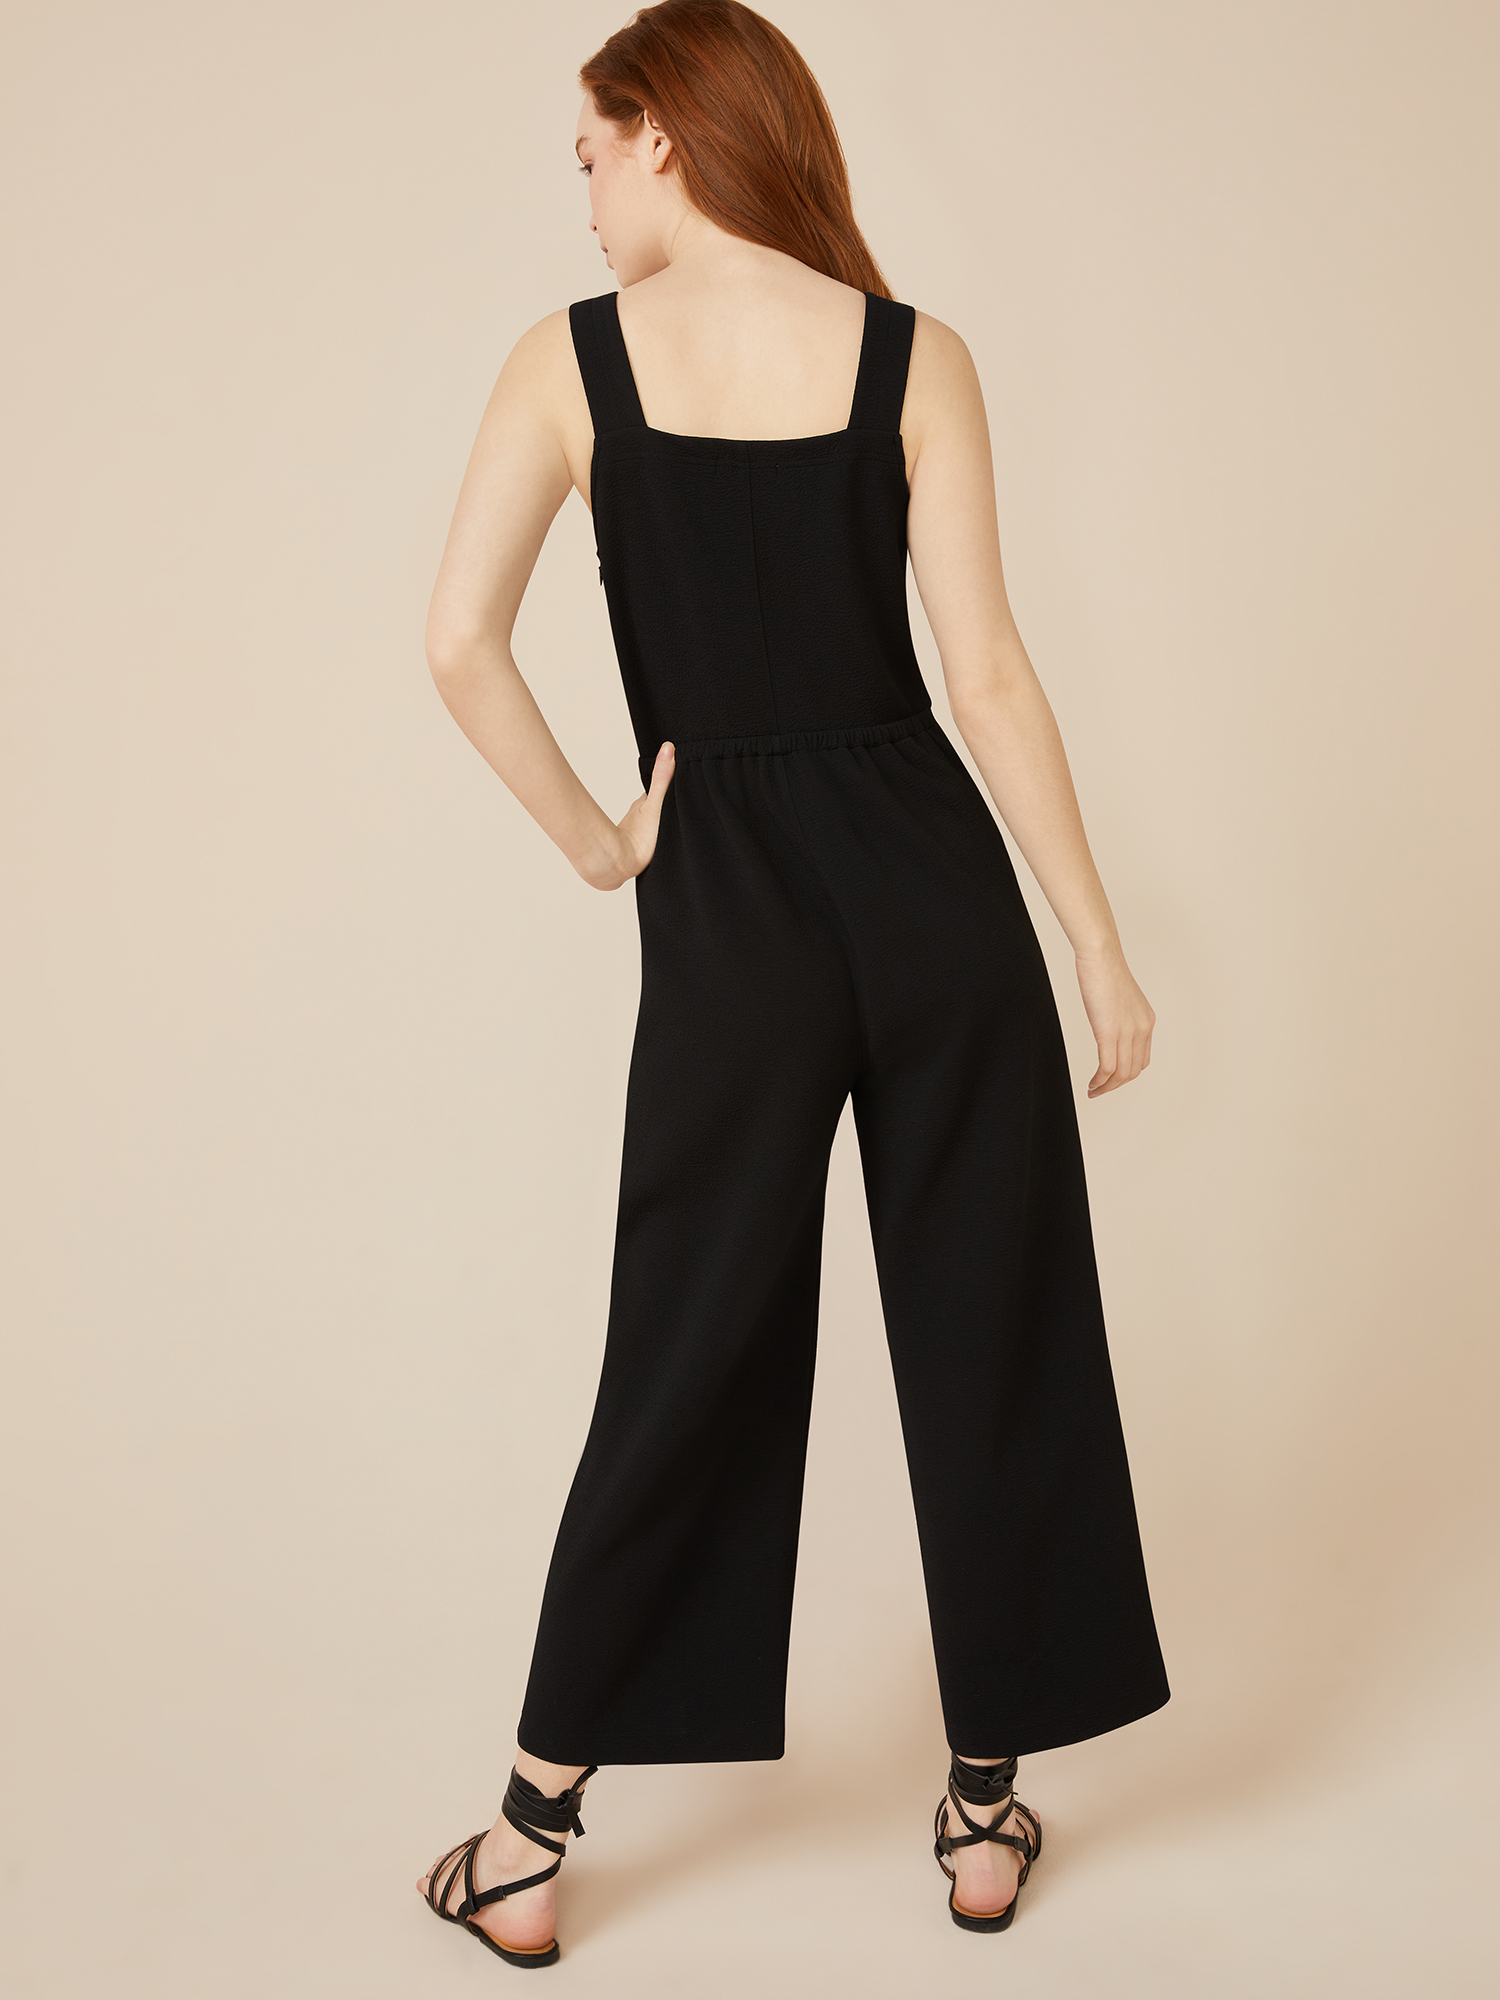 Free Assembly Women’s Wide Leg Playsuit - image 4 of 6